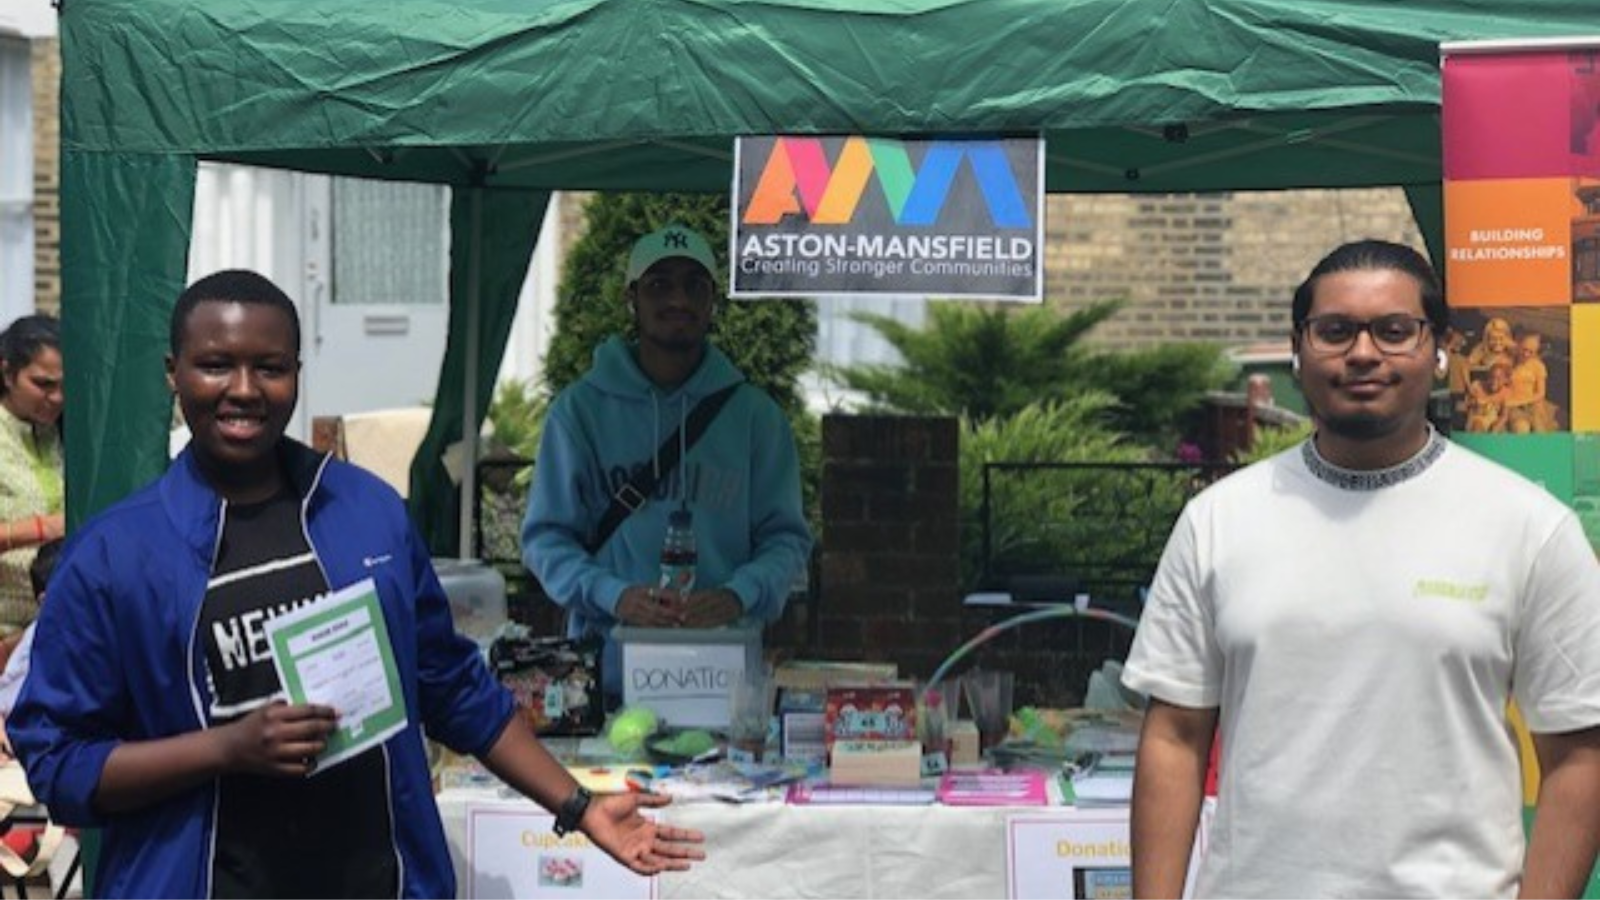 Running The Aston-Mansfield Stall At The Forest Gate Festival